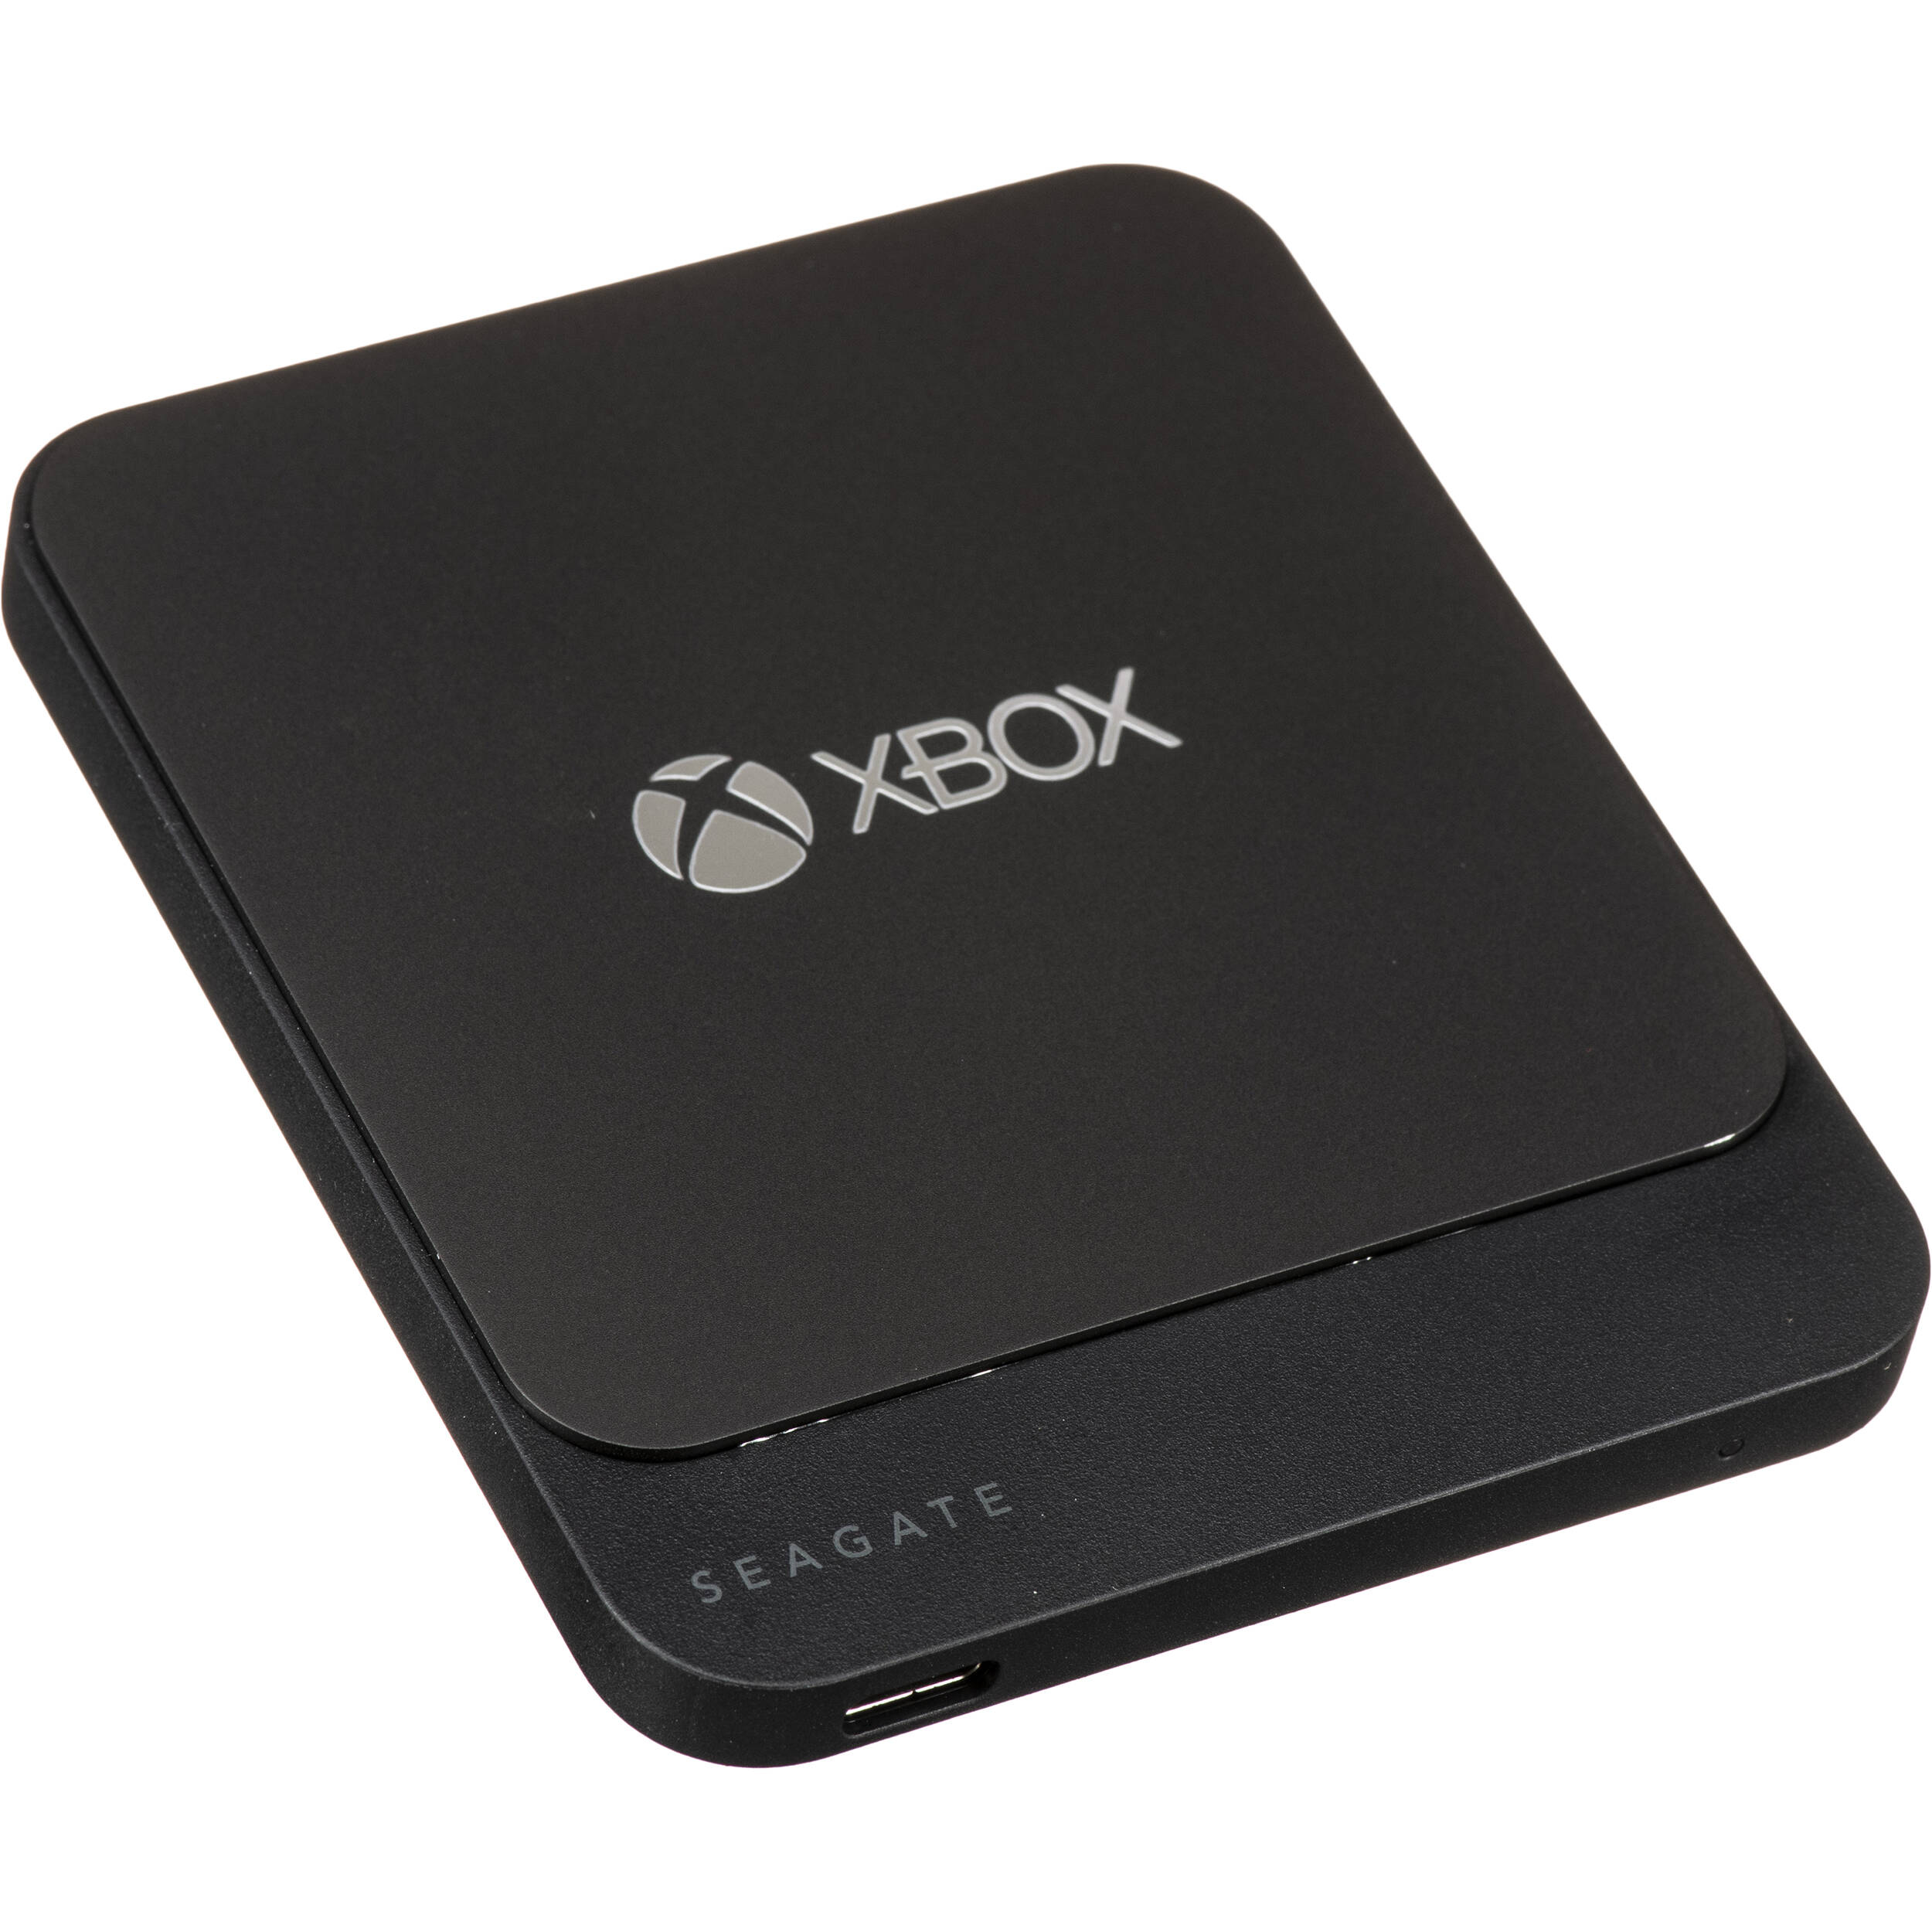 seagate for xbox one